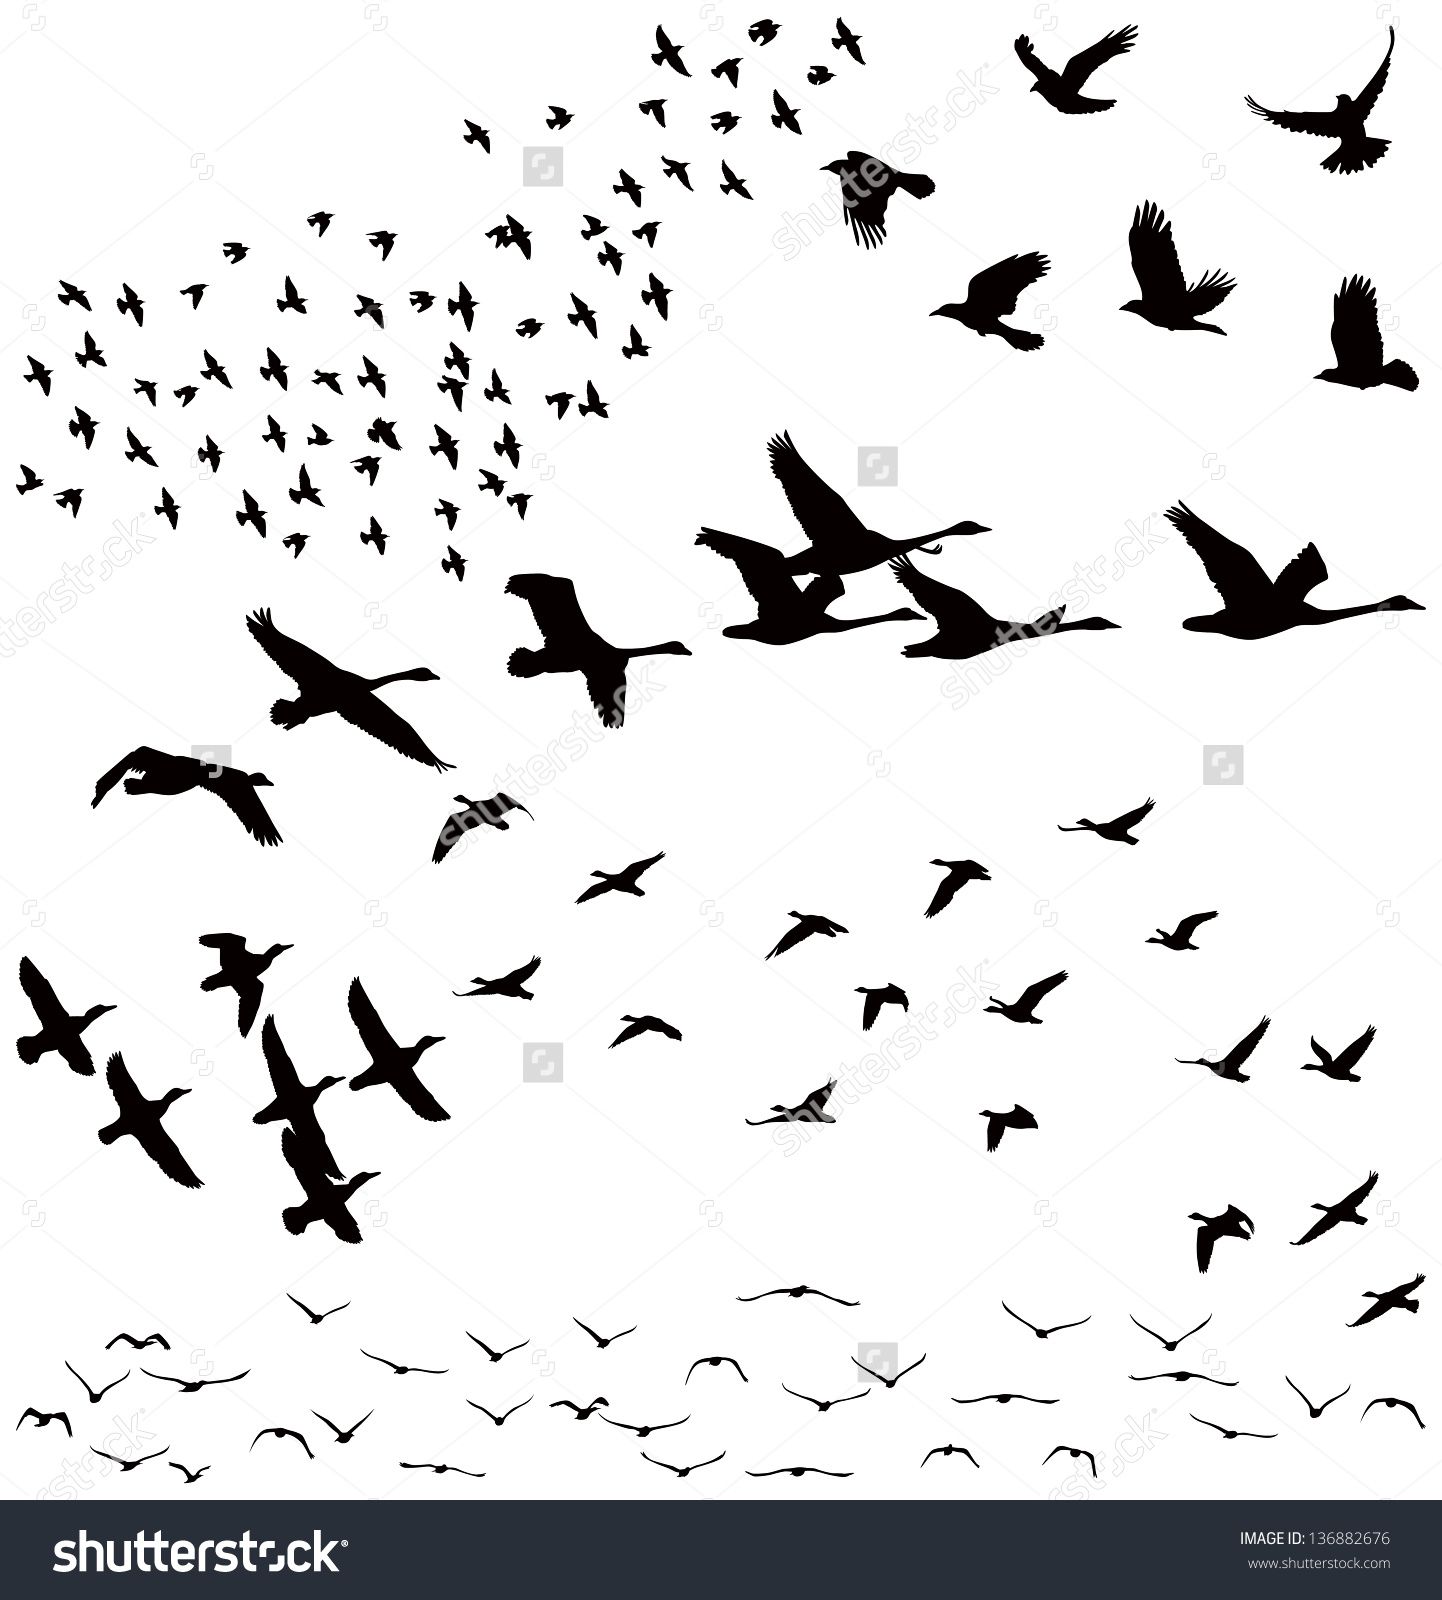 Vector Silhouettes: A Flock Of Birds, Crows, Swans, Geese ...